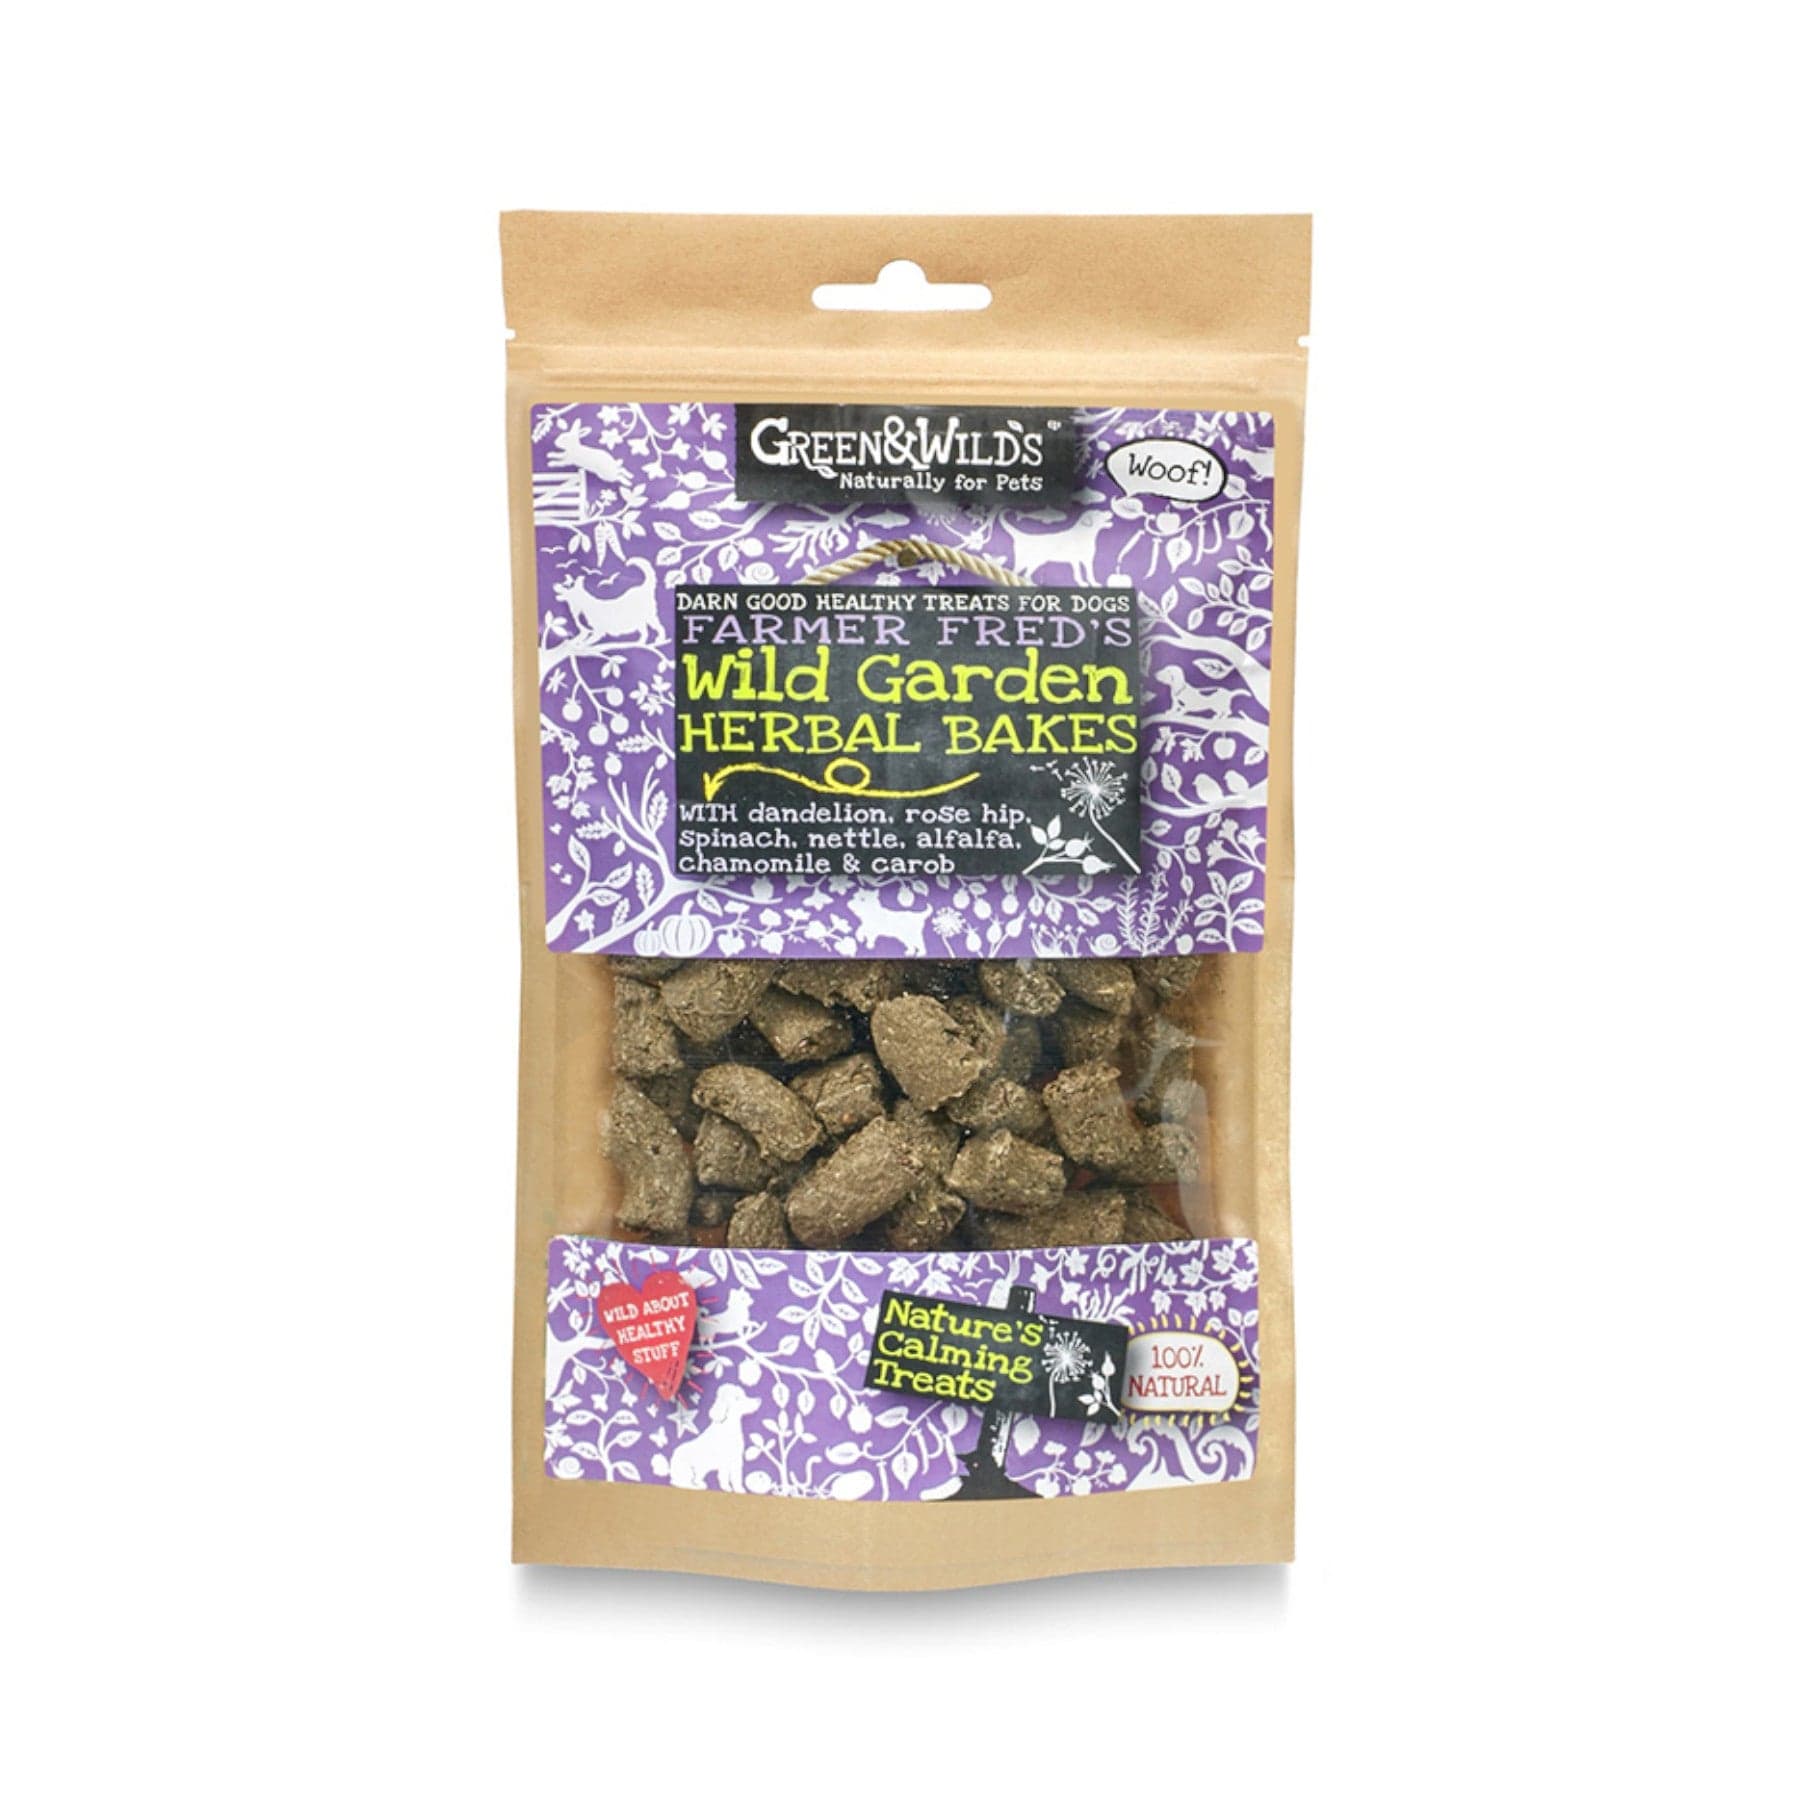 Green & Wilds Farmer Fred's Wild Garden Herbal Bakes dog treats packaging with visible healthy ingredients such as dandelion, rose hip, spinach, nettle, alfalfa, chamomile, and carob.